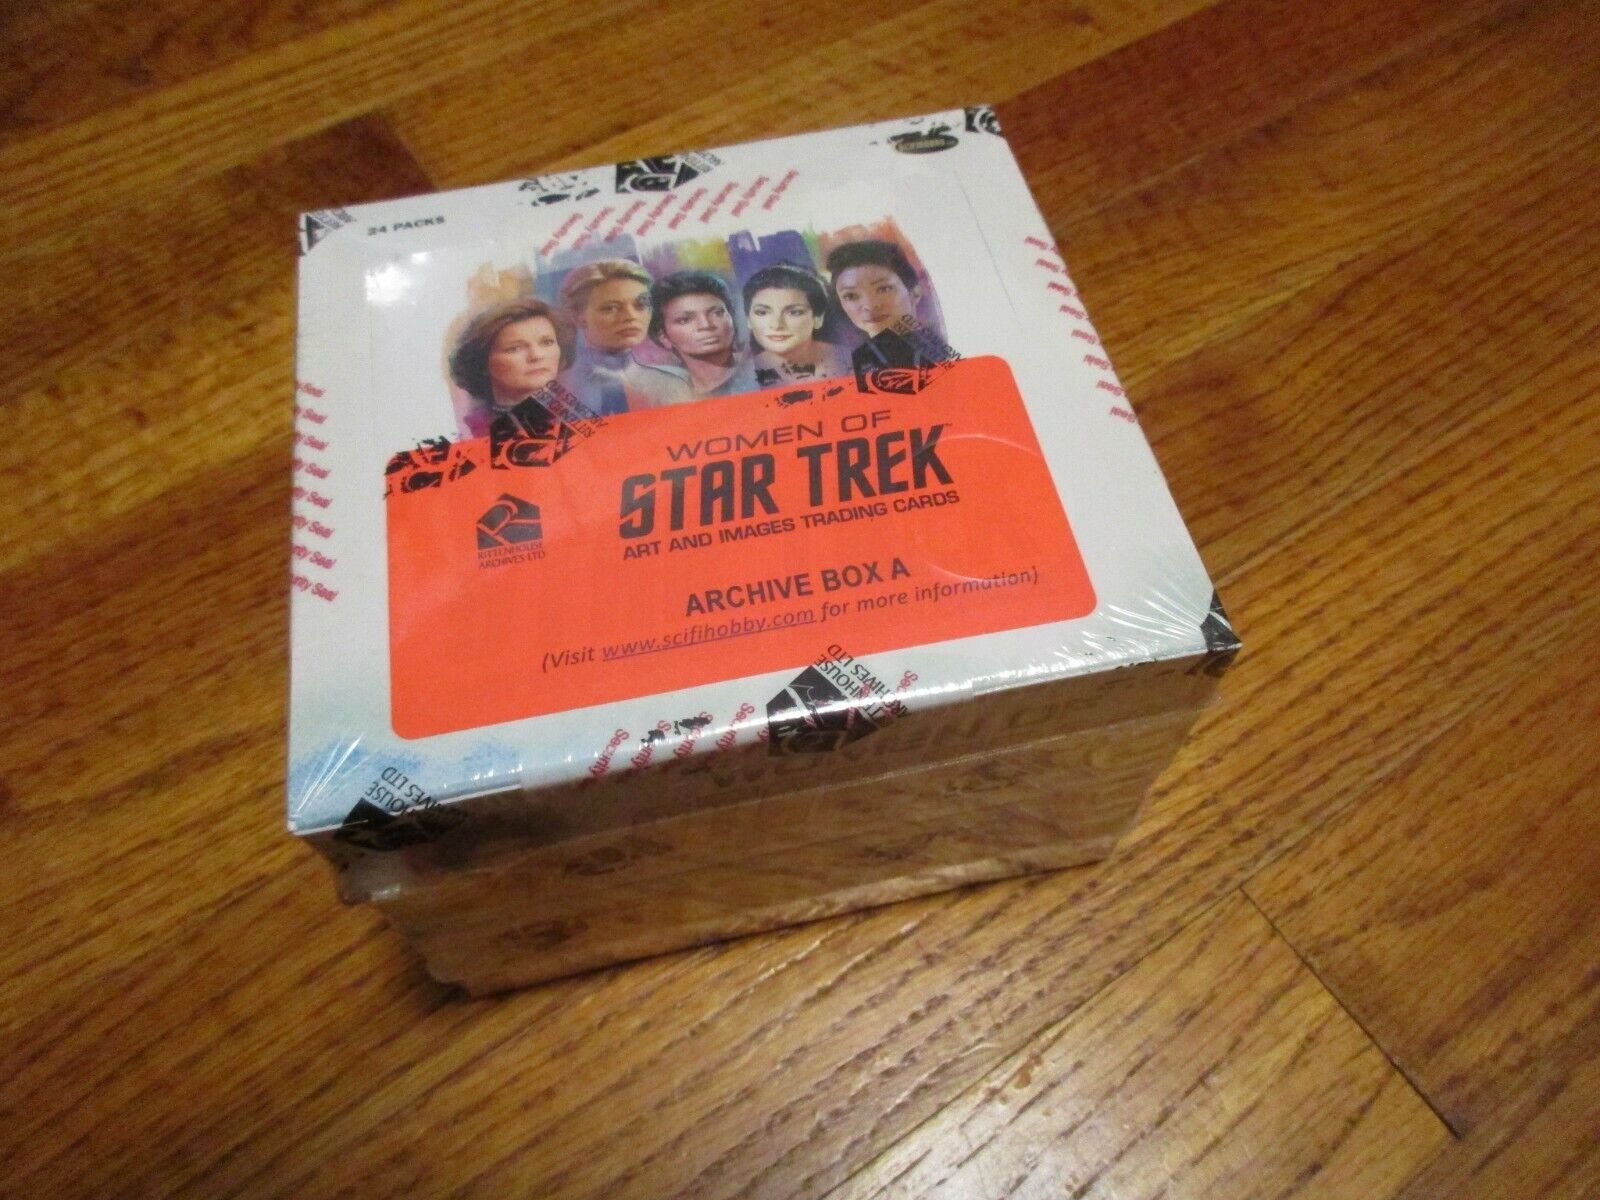 2021 Women of Star Trek Art and Images FACTORY SEALED ARCHIVE BOX / Master Set &